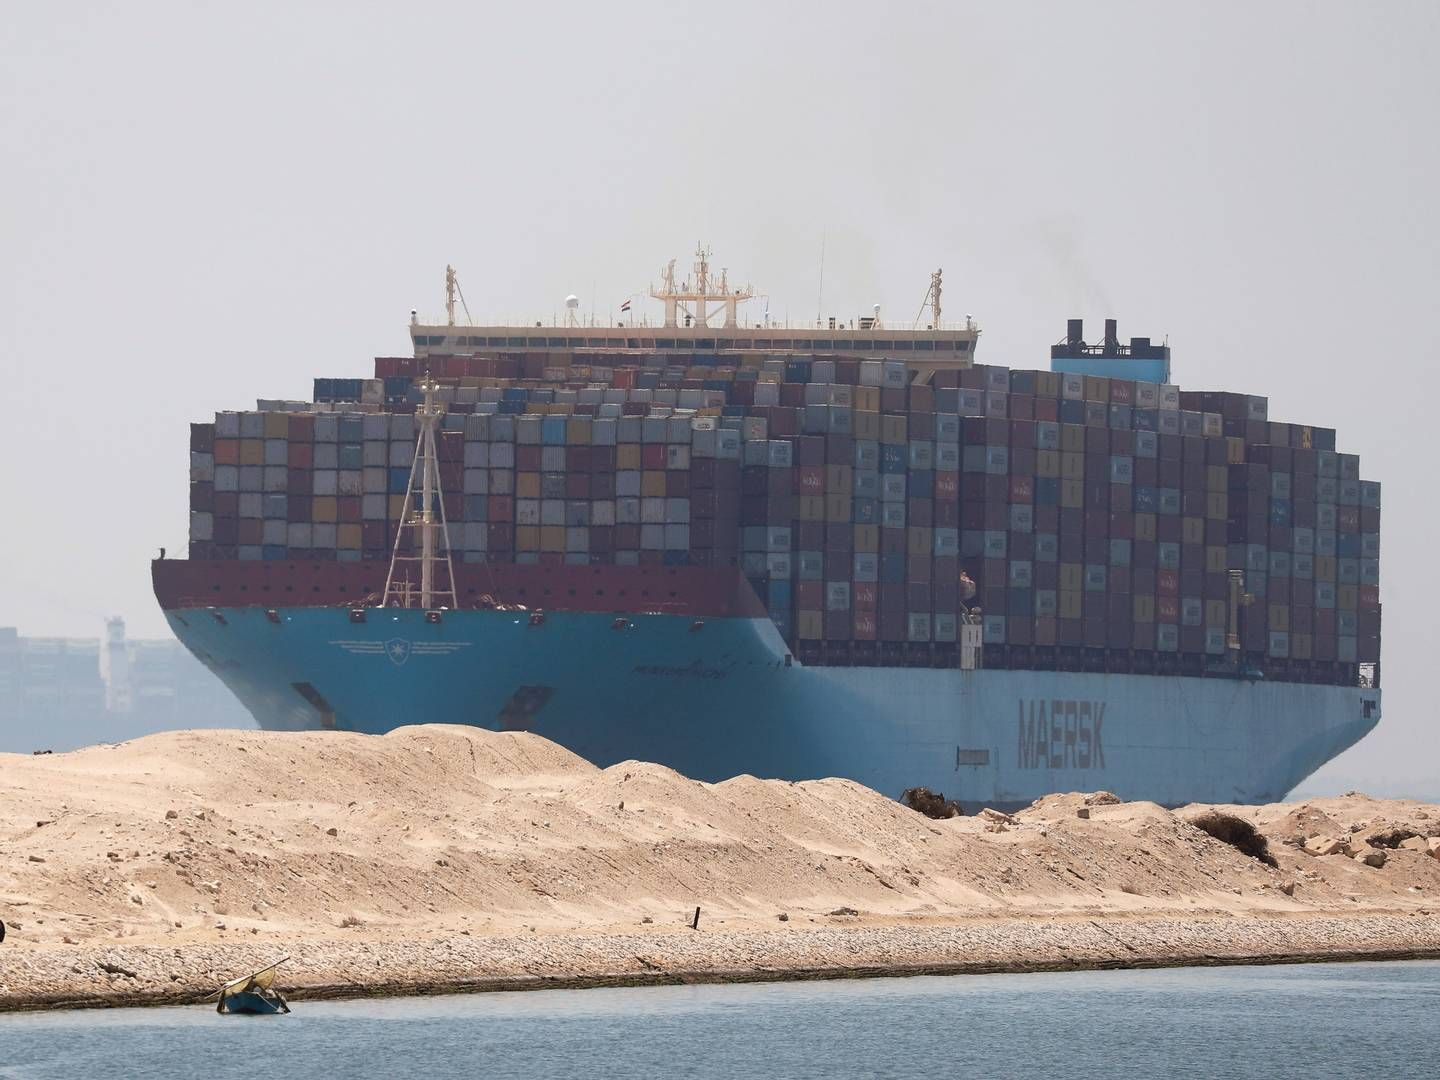 Ikea, Arla and Bog & Idé are all feeling the consequences of the recent attacks on merchant ships around the Red Sea. | Photo: Amr Abdallah Dalsh/Reuters/Ritzau Scanpix